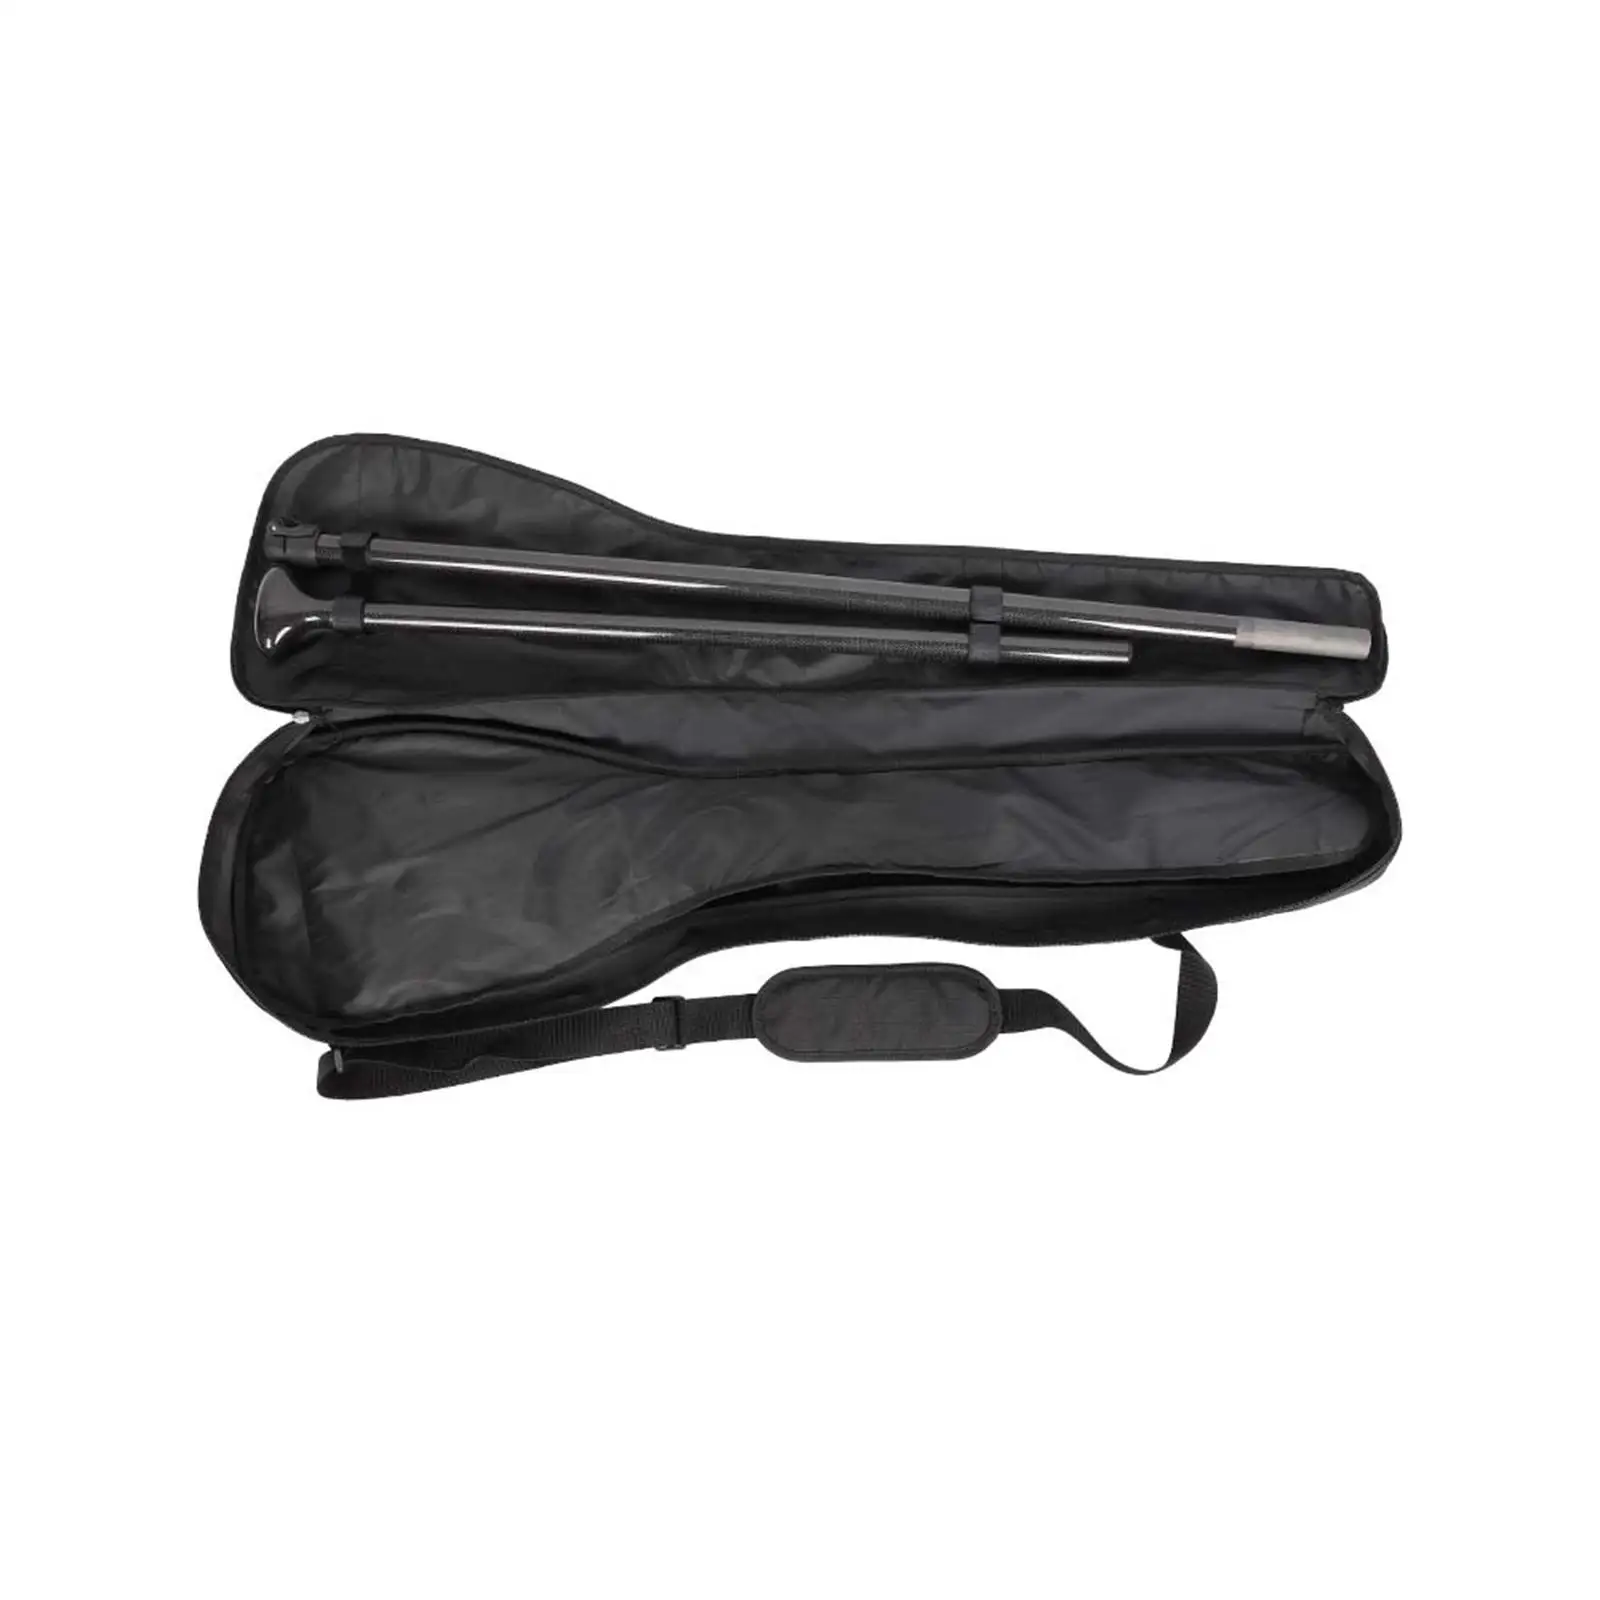 Kayak Paddle Carrying Bag for 3 Piece Split Paddle Oxford Fabric Spacious Interior Functional Professional Stylish Length 96cm